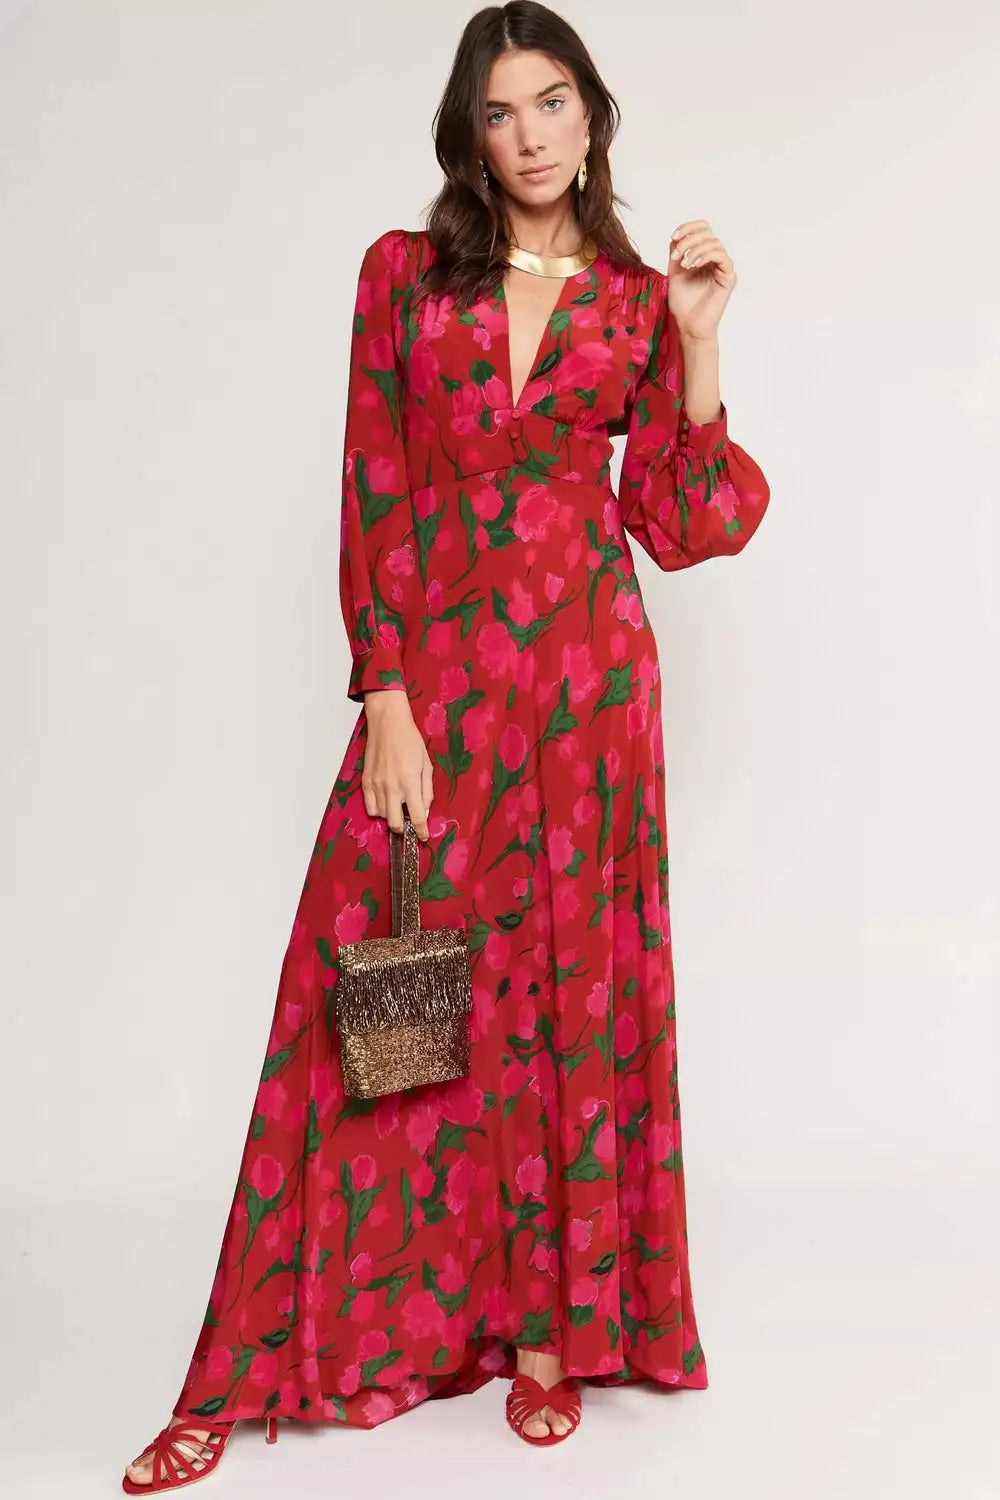 Elevate your style with the Dress Rose, a gorgeous handmade masterpiece by a high-end designer. Perfect for shopping and banquets, this dress features a stunning red print and a long, elegant silhouette. Experience luxury and sophistication with every wear.